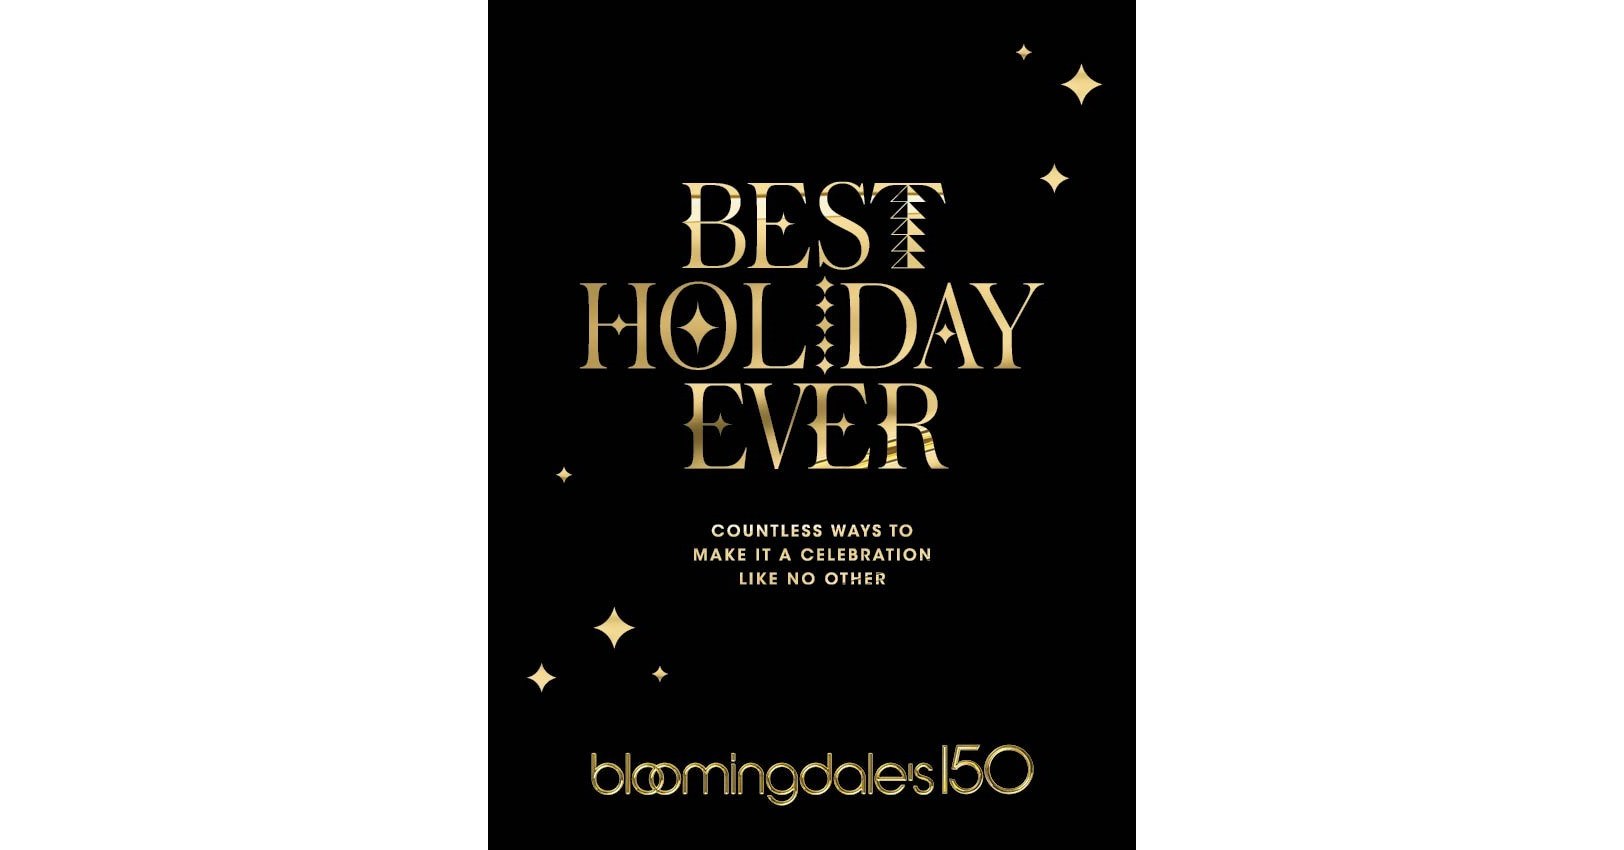 Bloomingdale's unveils holiday window displays at flagship 59th